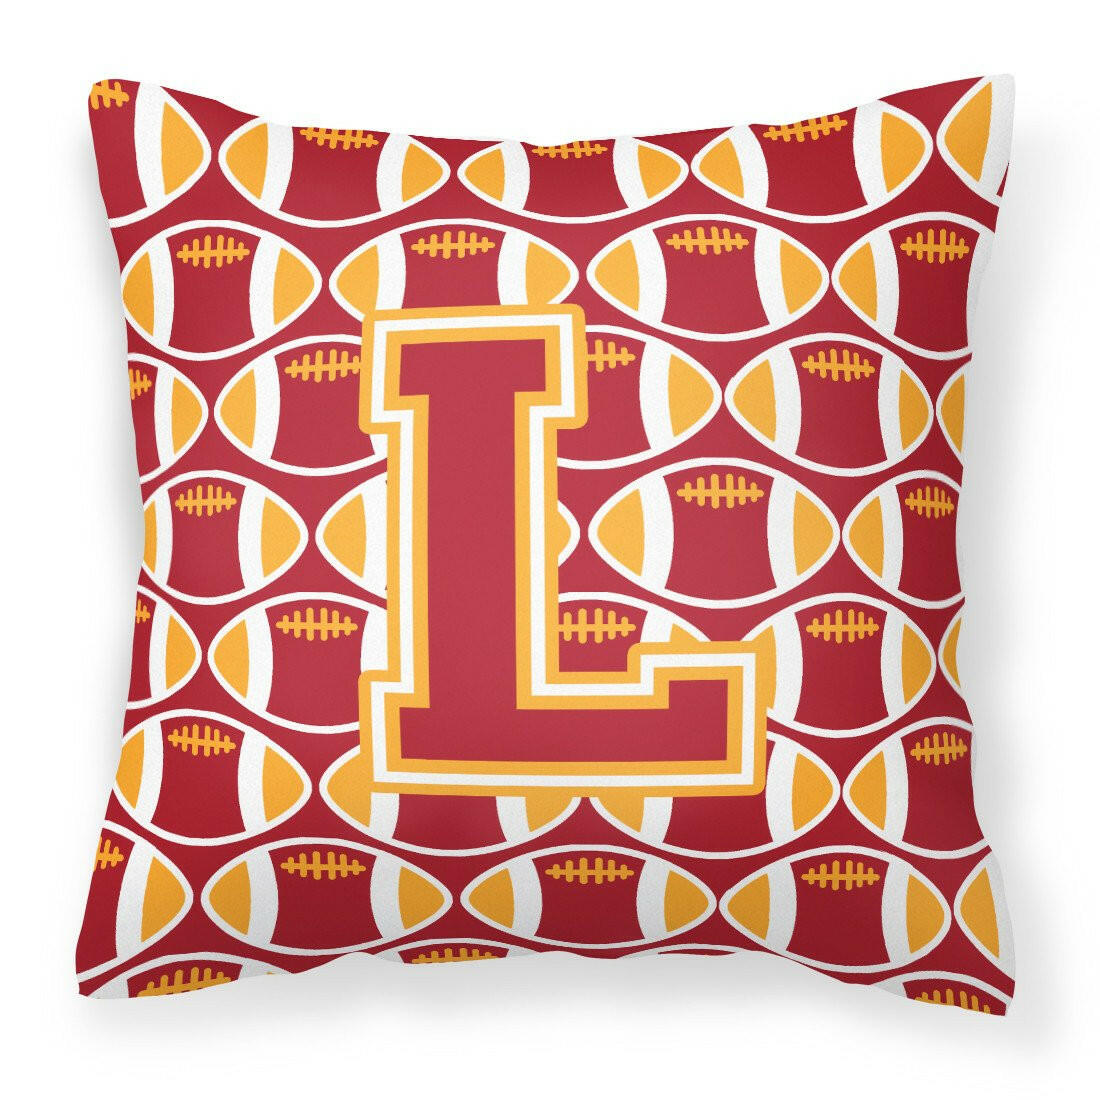 Letter L Football Cardinal and Gold Fabric Decorative Pillow CJ1070-LPW1414 by Caroline's Treasures